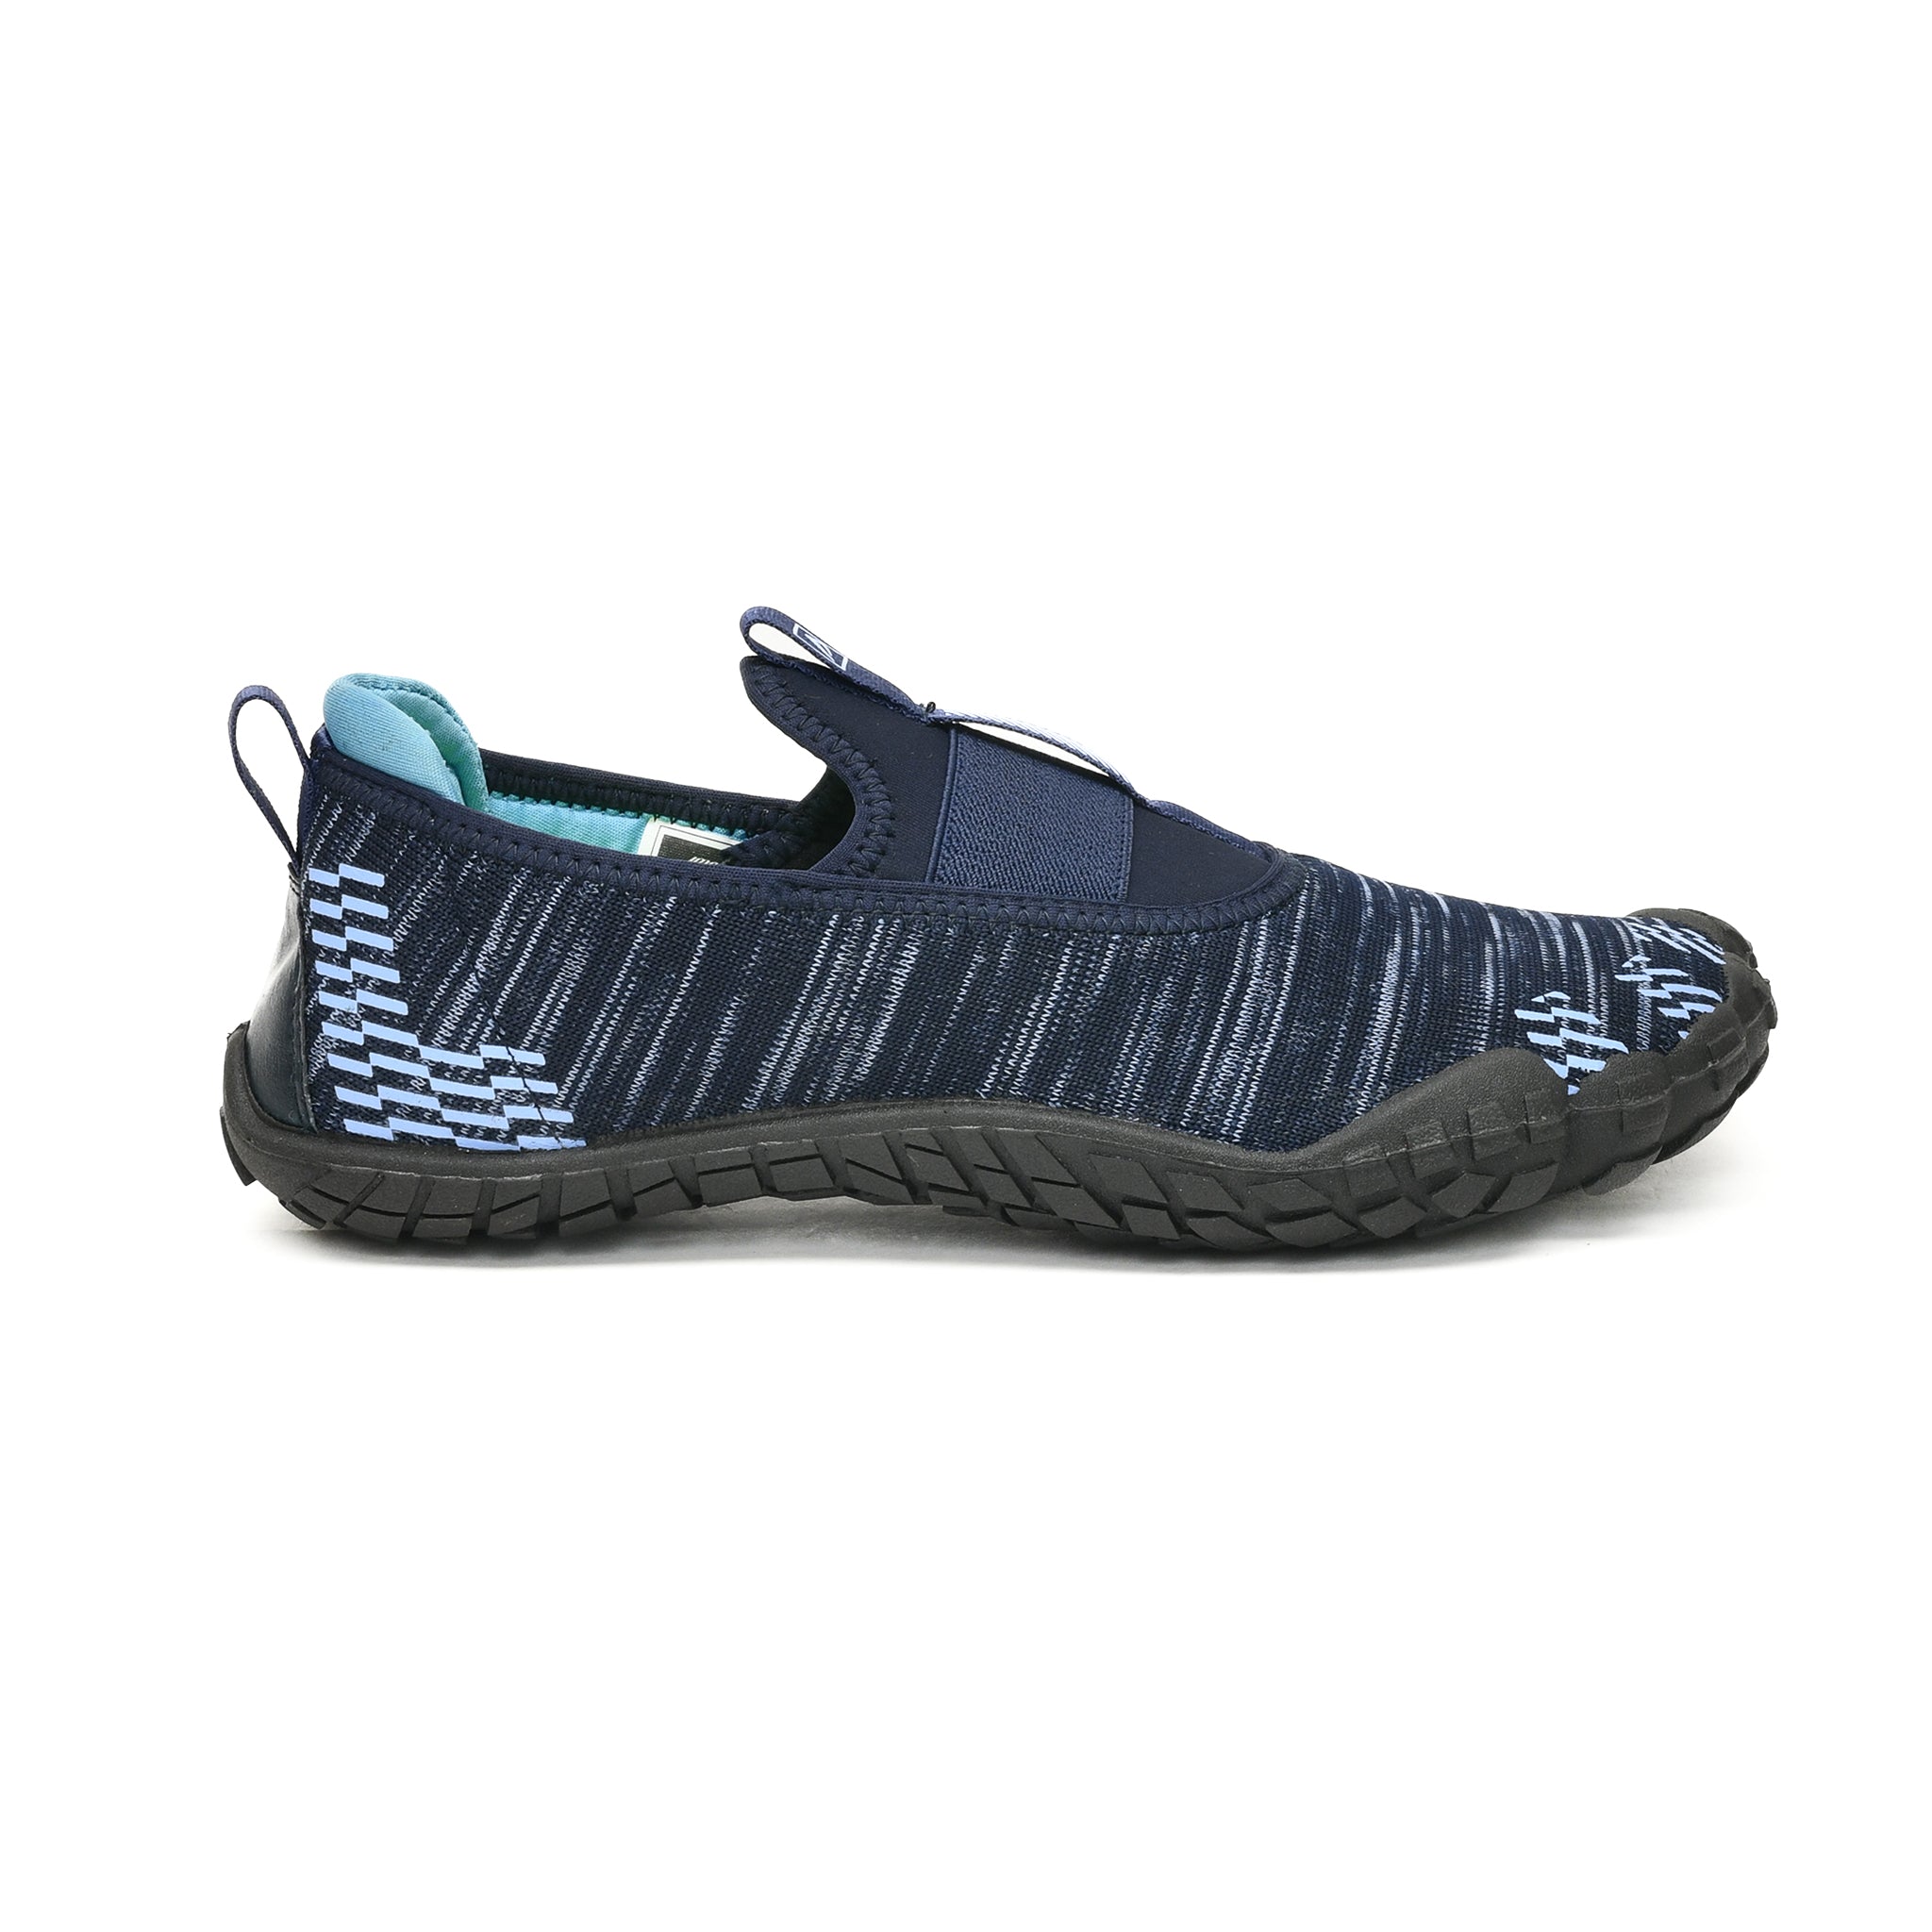 Impakto Barefoot Rooted Men's Multi Gym Shoes